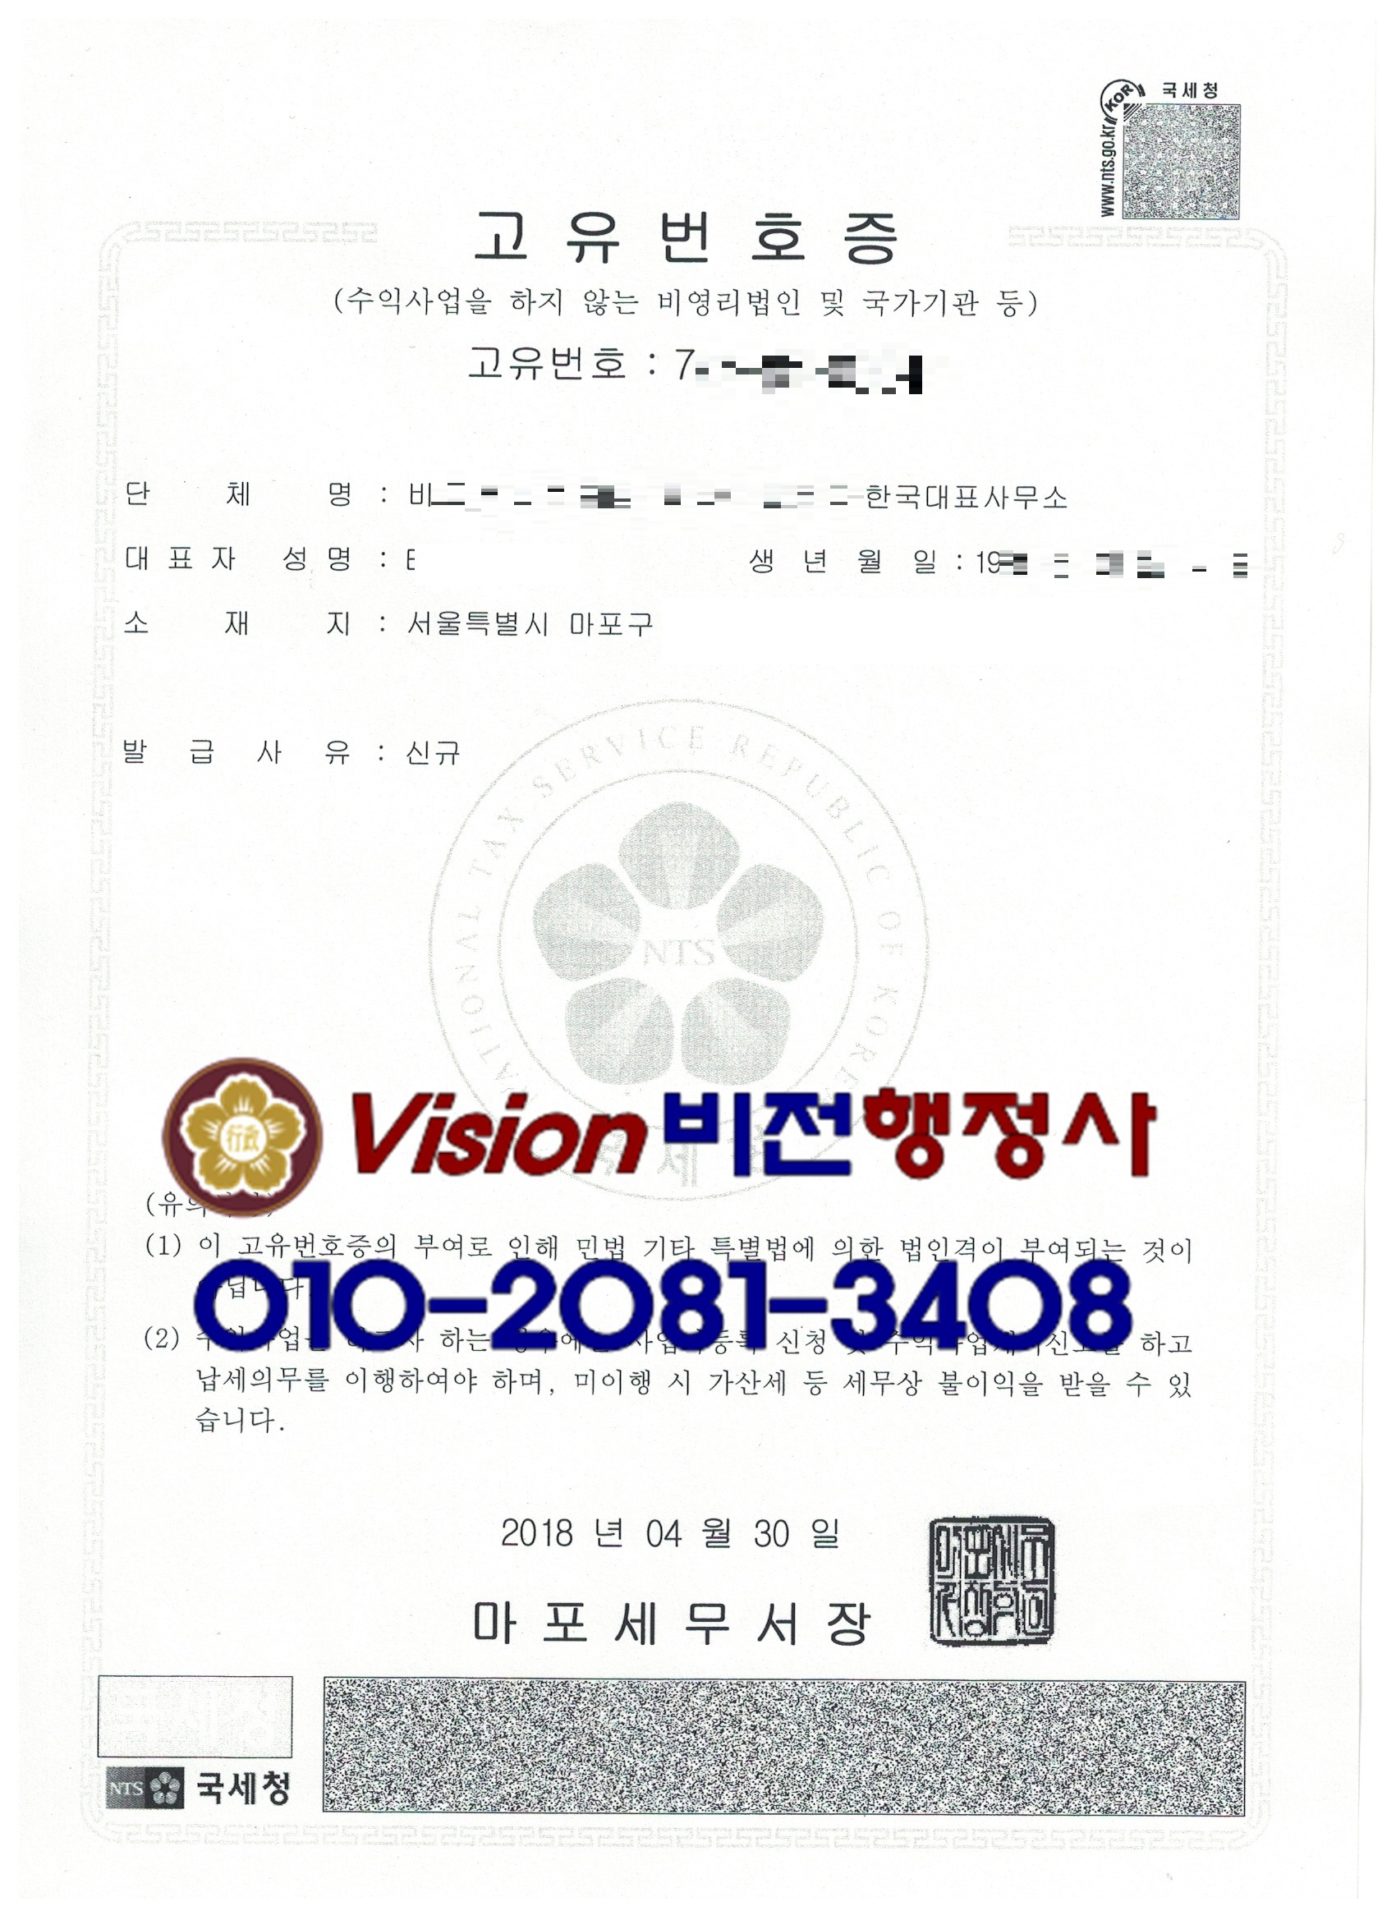 Dispatch of employees to the Chinese corporation of the representative office of Korea